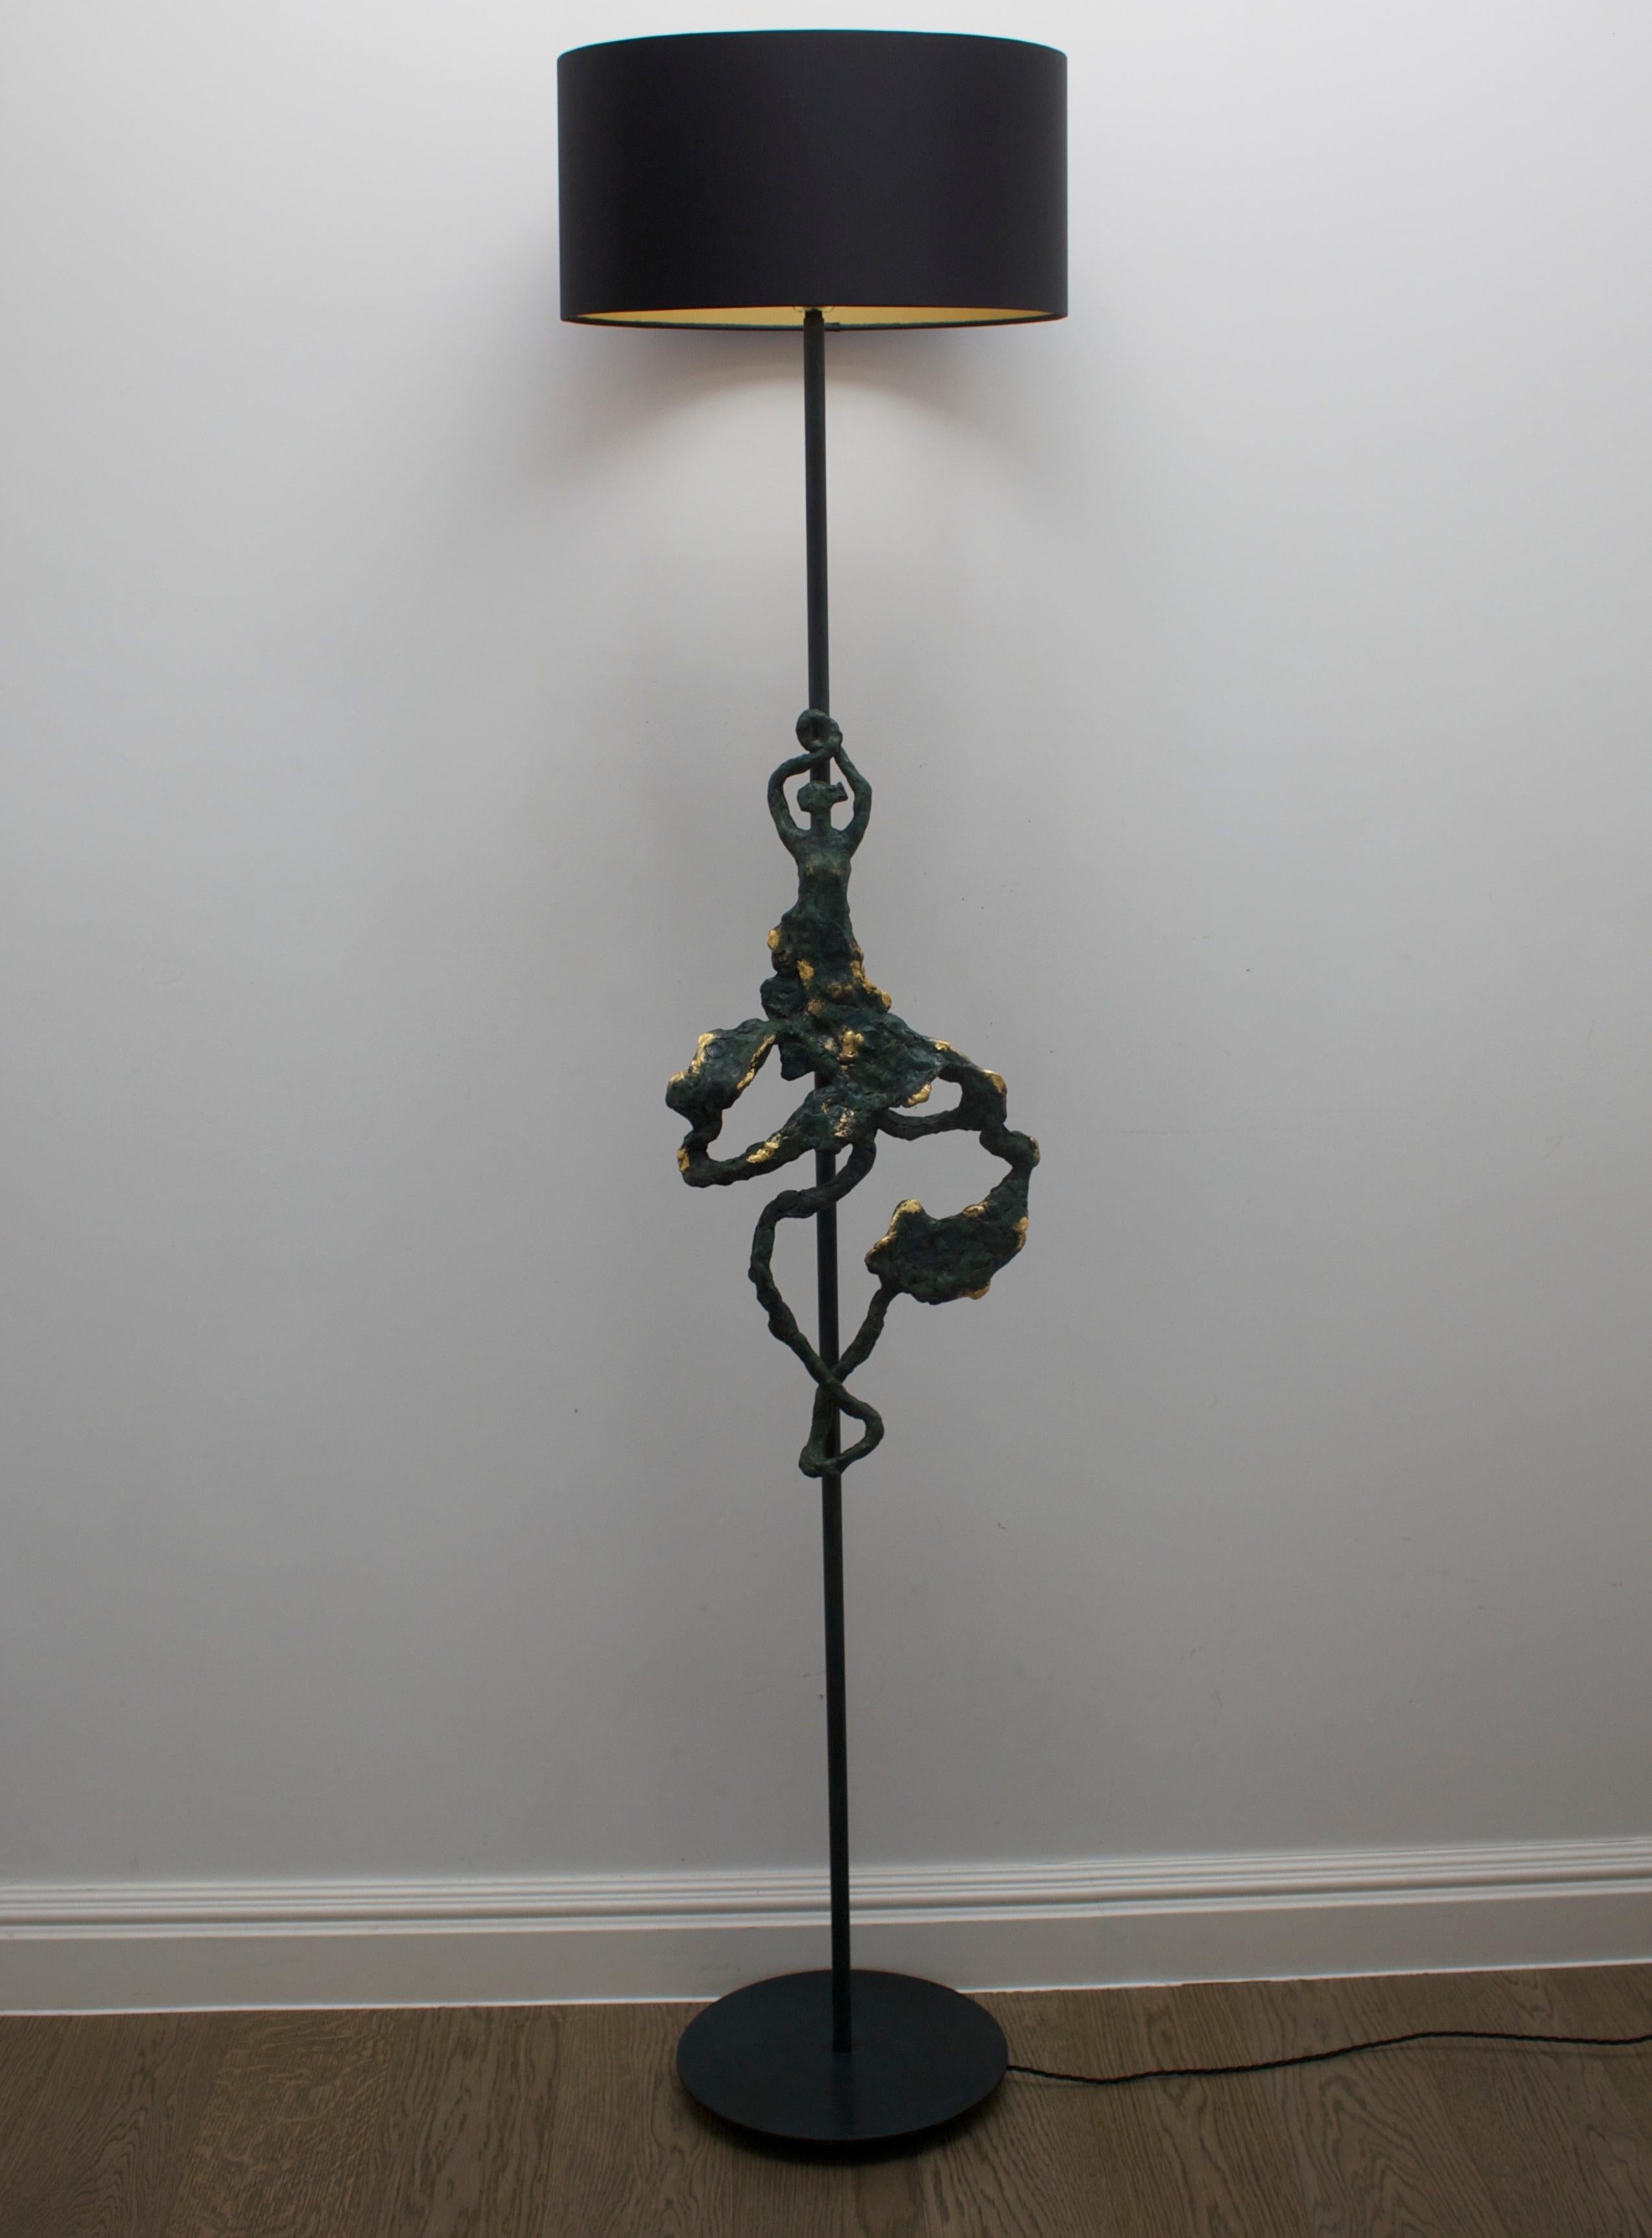 Titled 'Flamenco', this exquisite  sculptural bronze floor lamp is meticulously handcrafted to embody the essence of Flamenco dance.  Inspired by the artist and designer's Spanish heritage, the lamp captures the graceful movements and vibrant energy